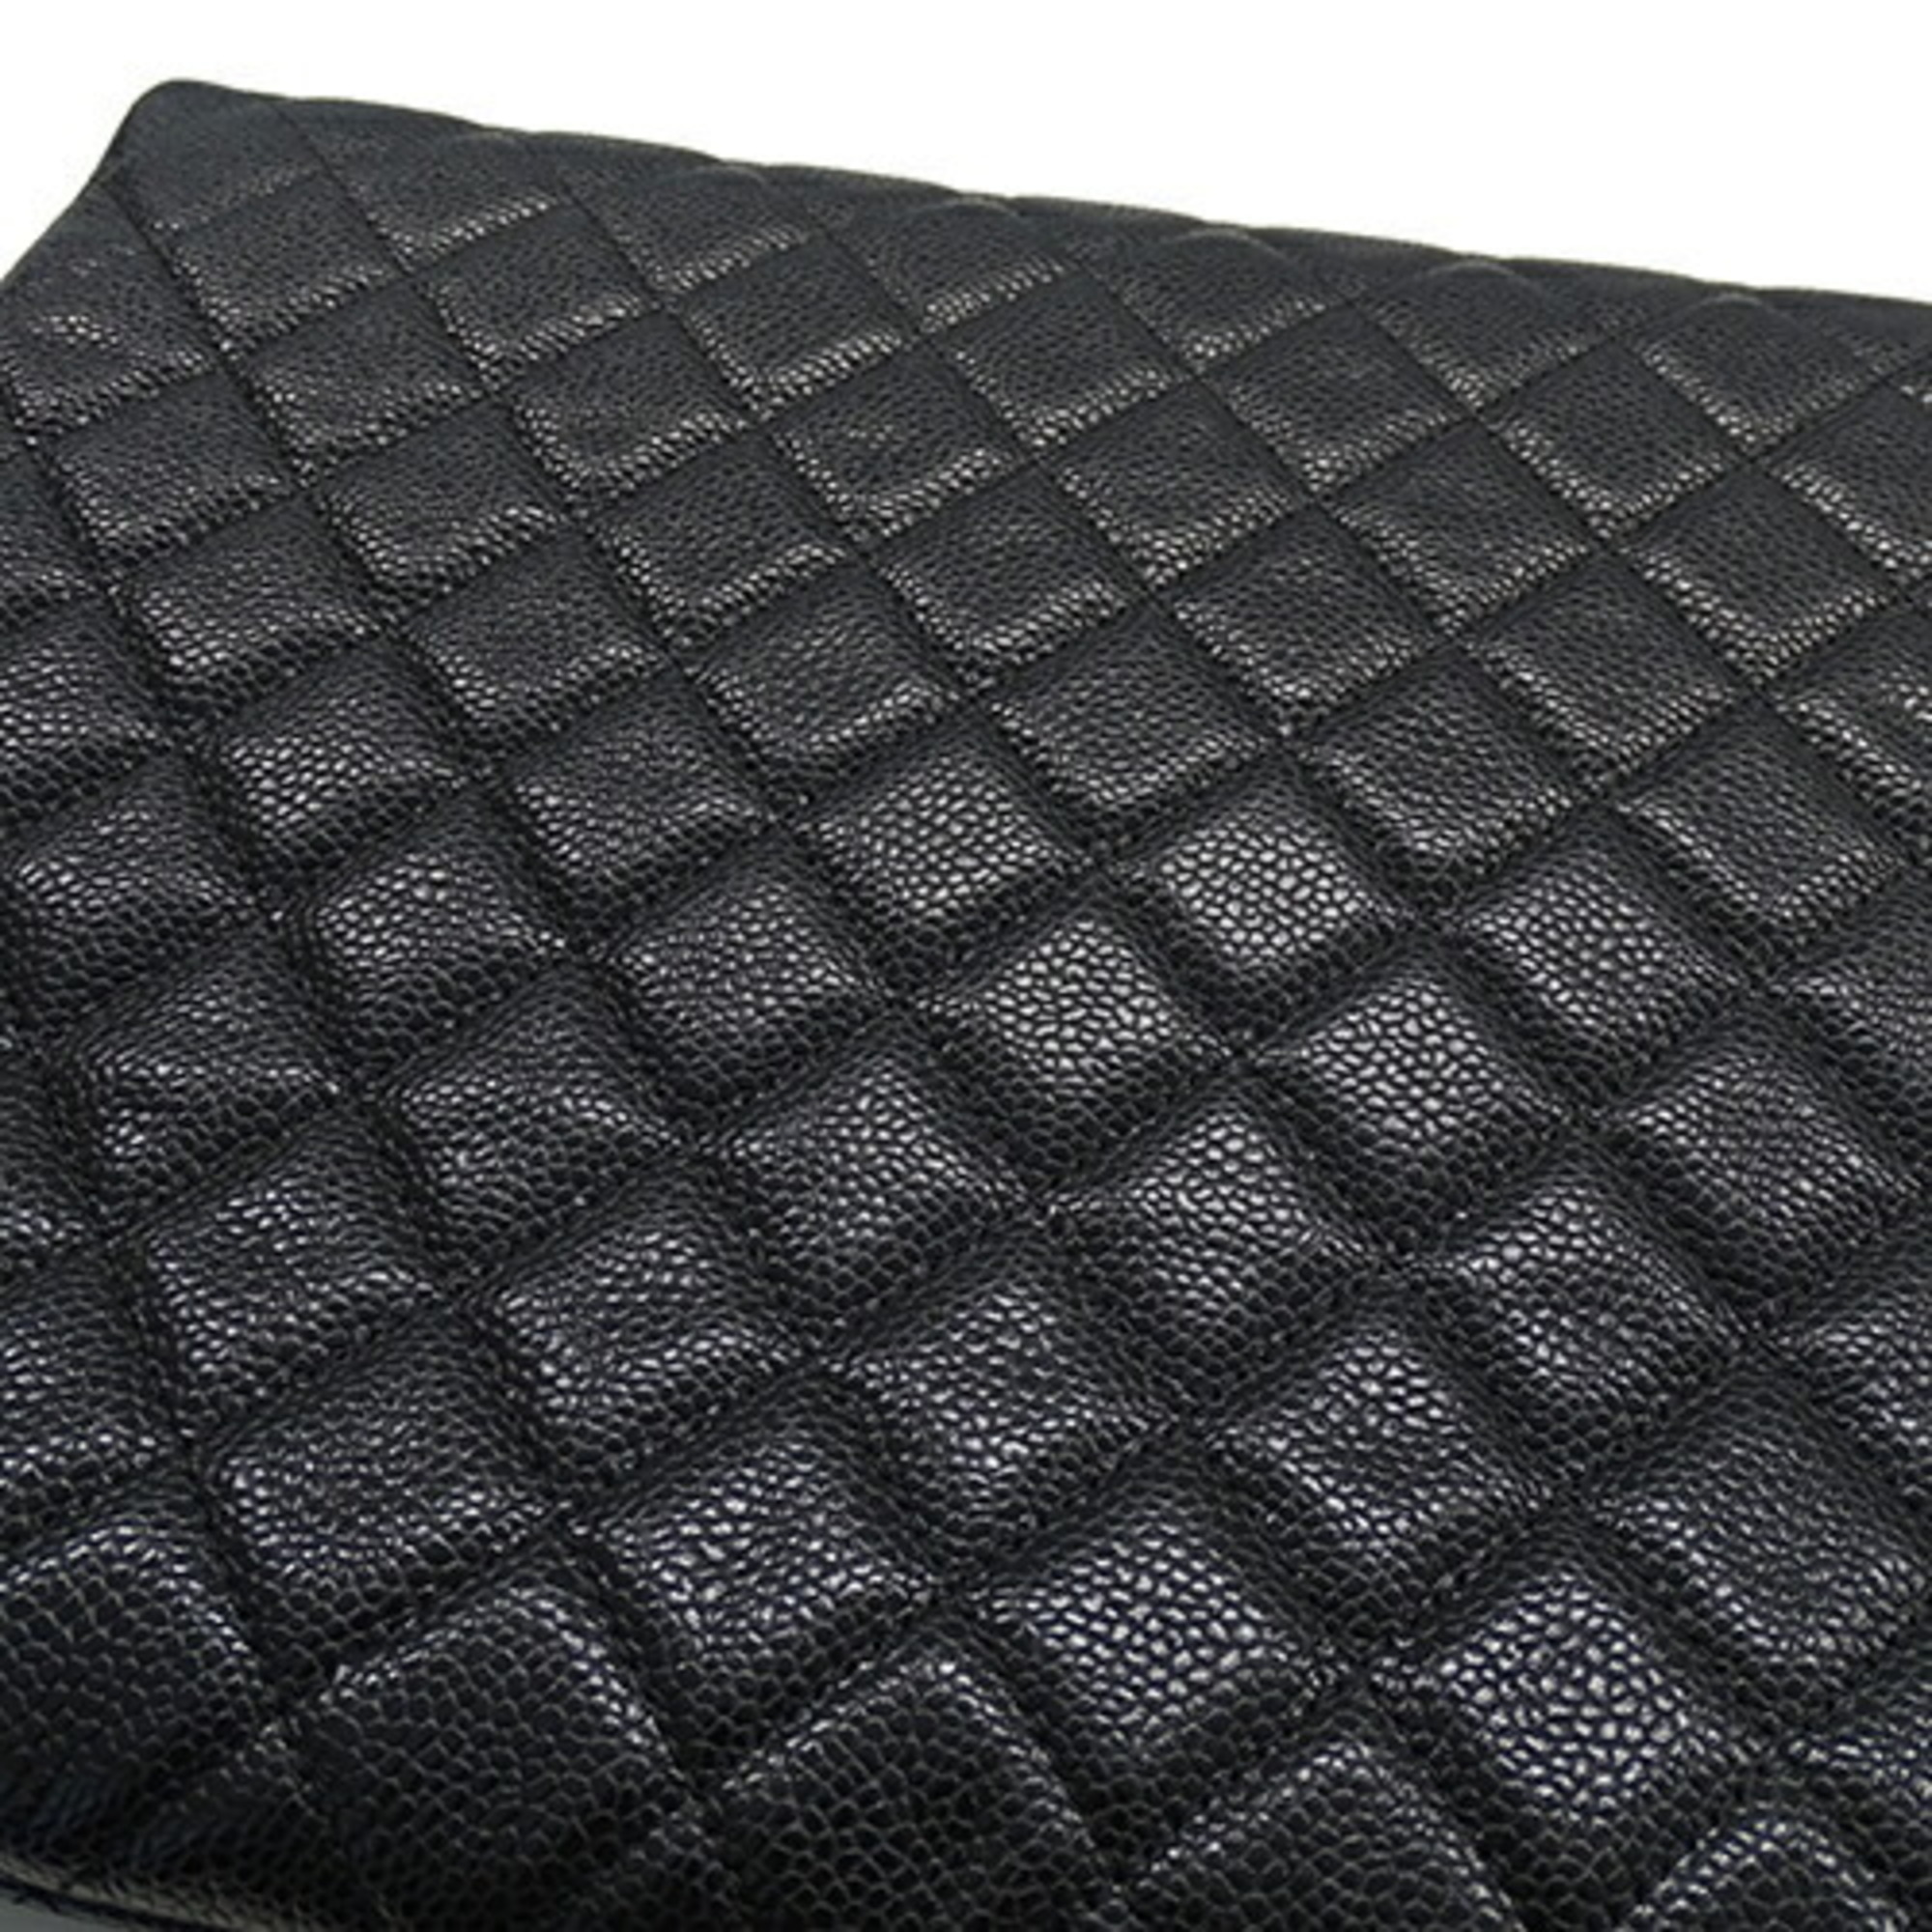 CHANEL Bags for Women and Men, Clutch Bags, Second Caviar Skin, Matelasse, Black, Champagne